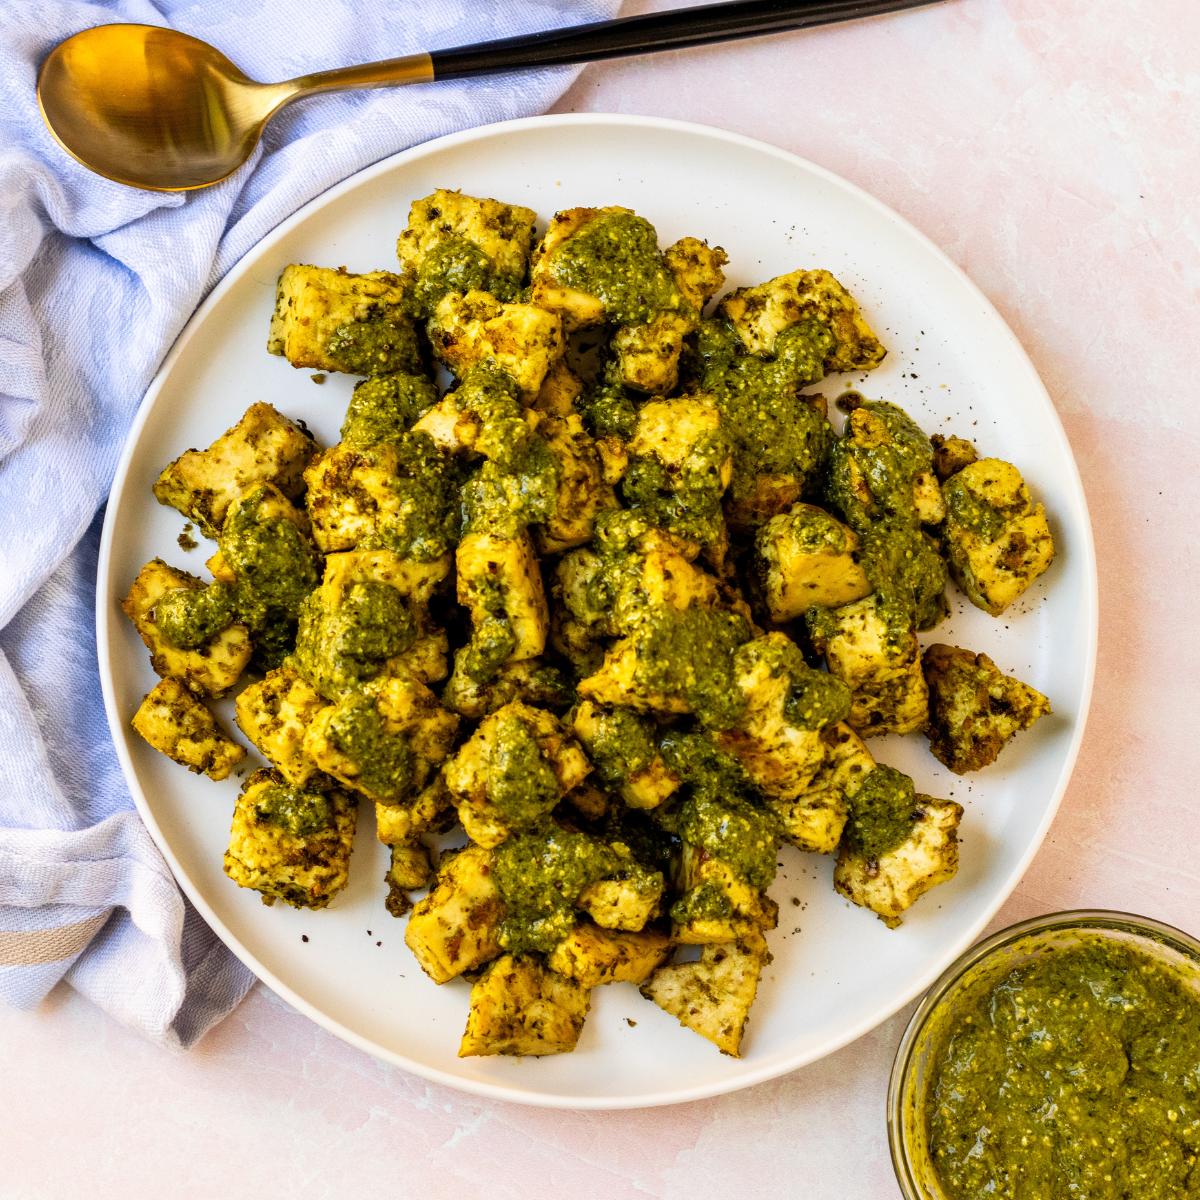 Baked tofu chunks on a plate drizzled with pesto sauce.